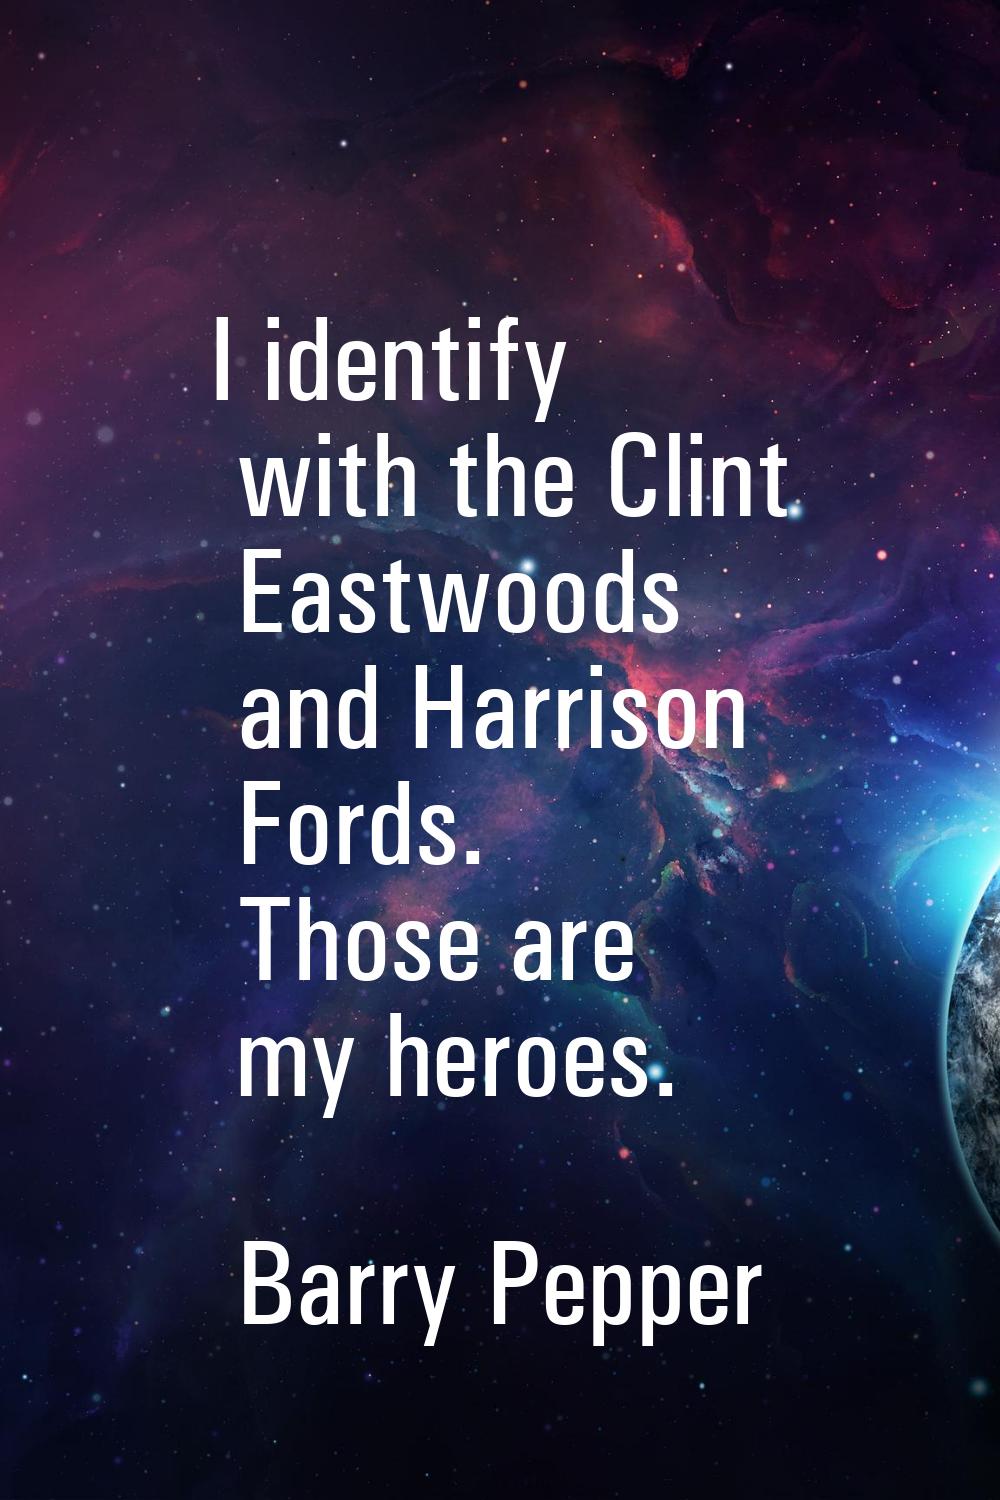 I identify with the Clint Eastwoods and Harrison Fords. Those are my heroes.